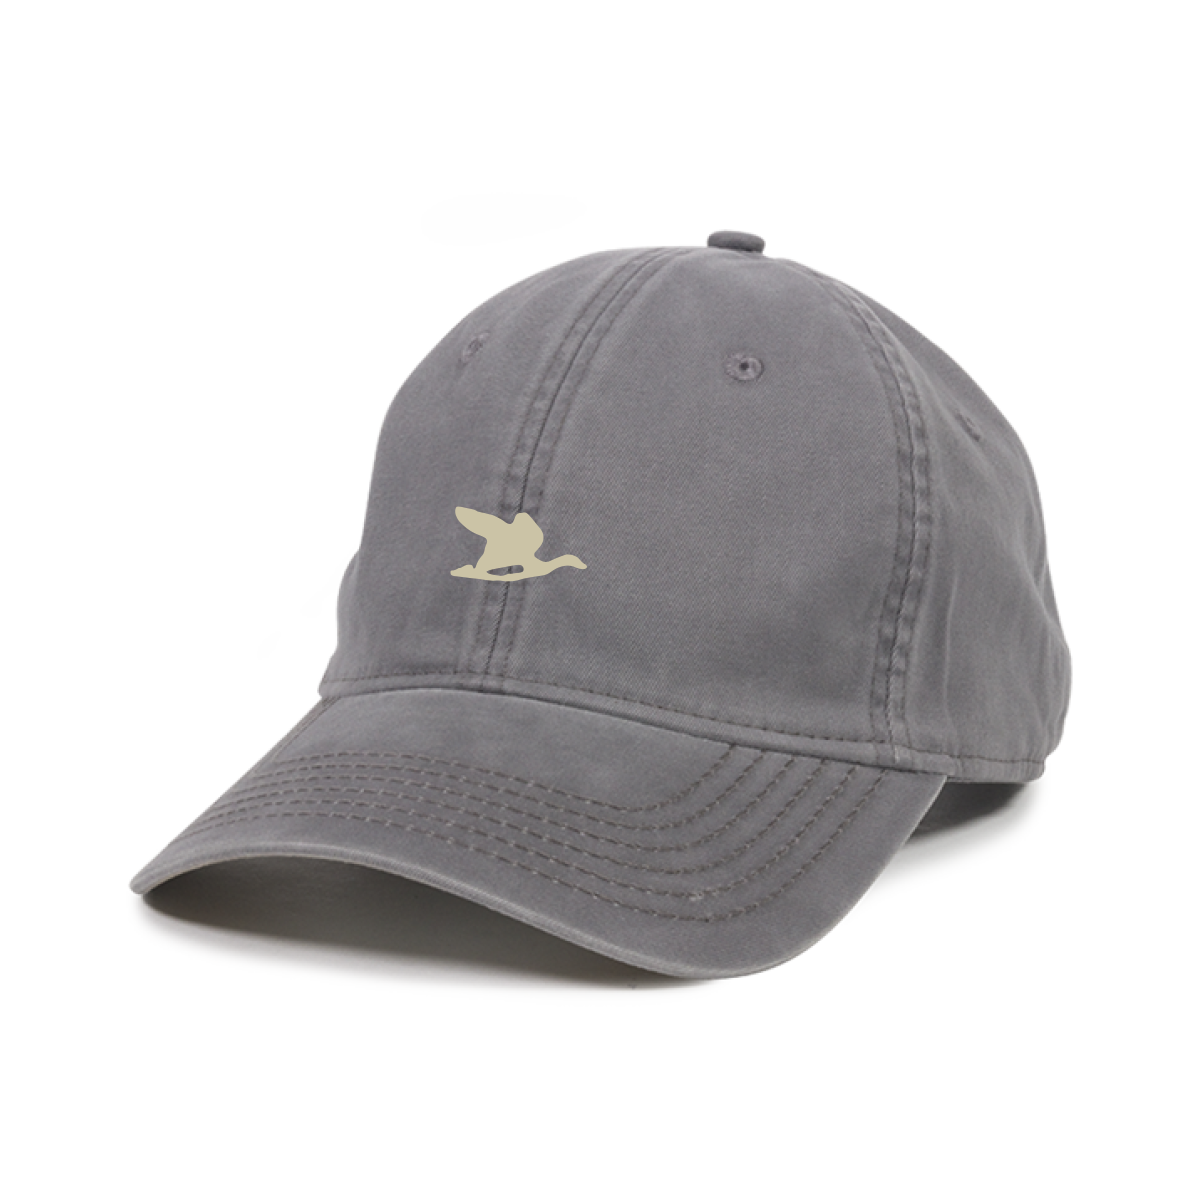 Flying Duck Co. Grey Dad Hat - NEW